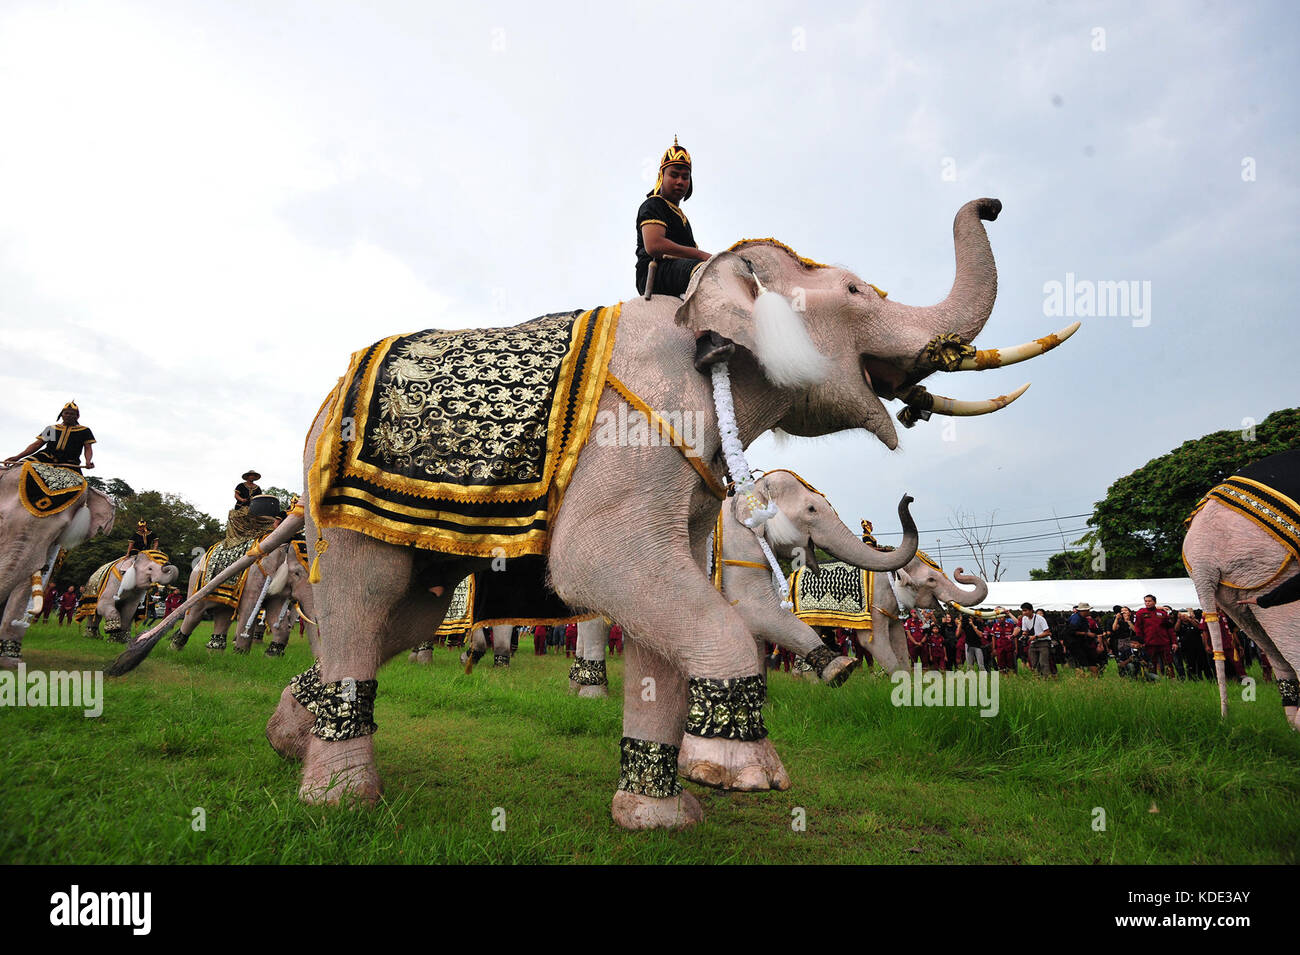 https://c8.alamy.com/comp/KDE3AY/ayutthaya-thailand-13th-oct-2017-a-formation-of-white-elephants-and-KDE3AY.jpg